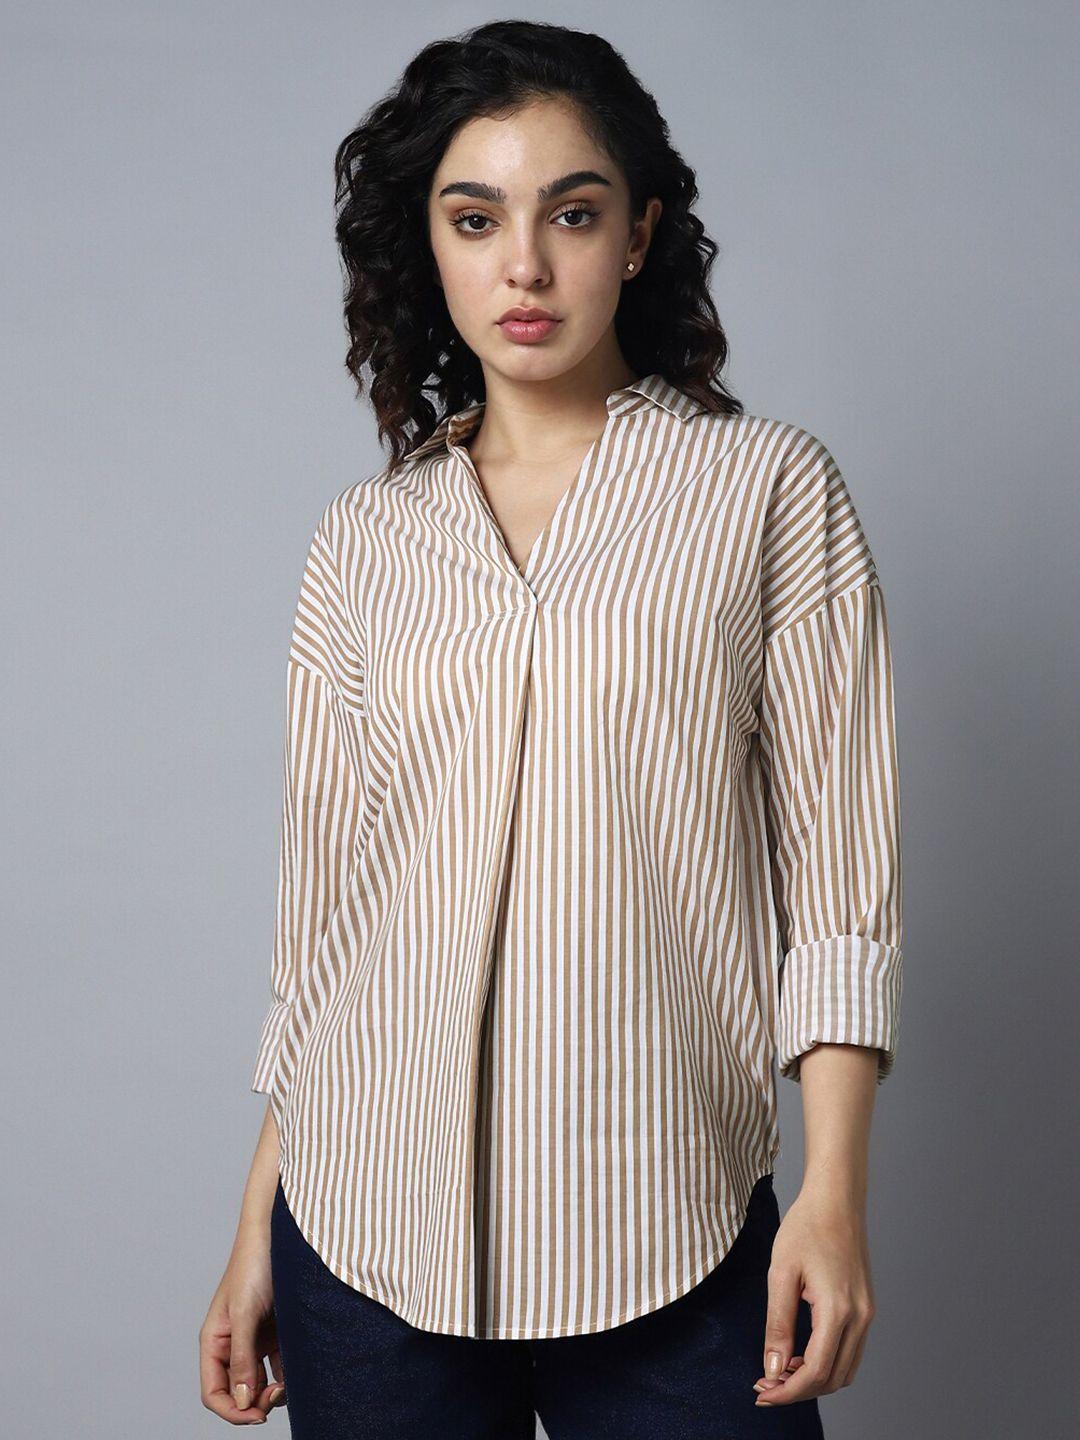 high star vertical striped pure cotton shirt style top